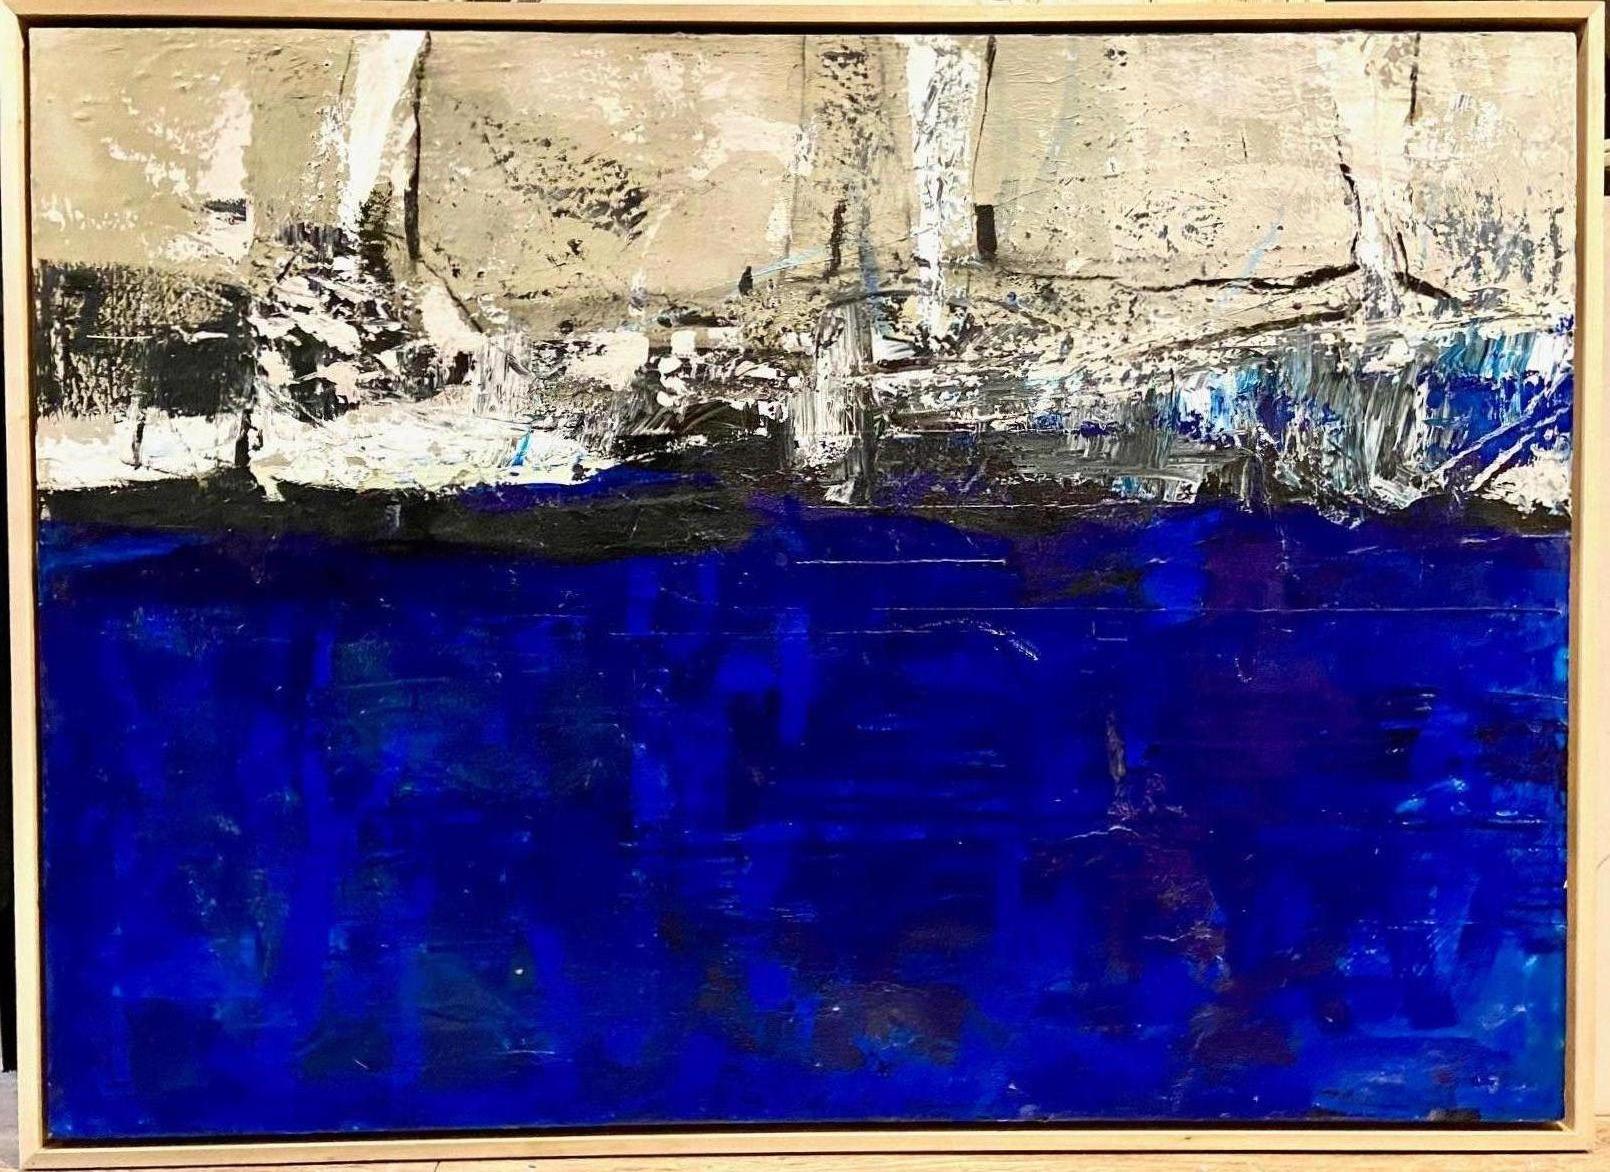 Ocean Large Blue Abstract Expressionist  - Painting by Jerzy Kubina